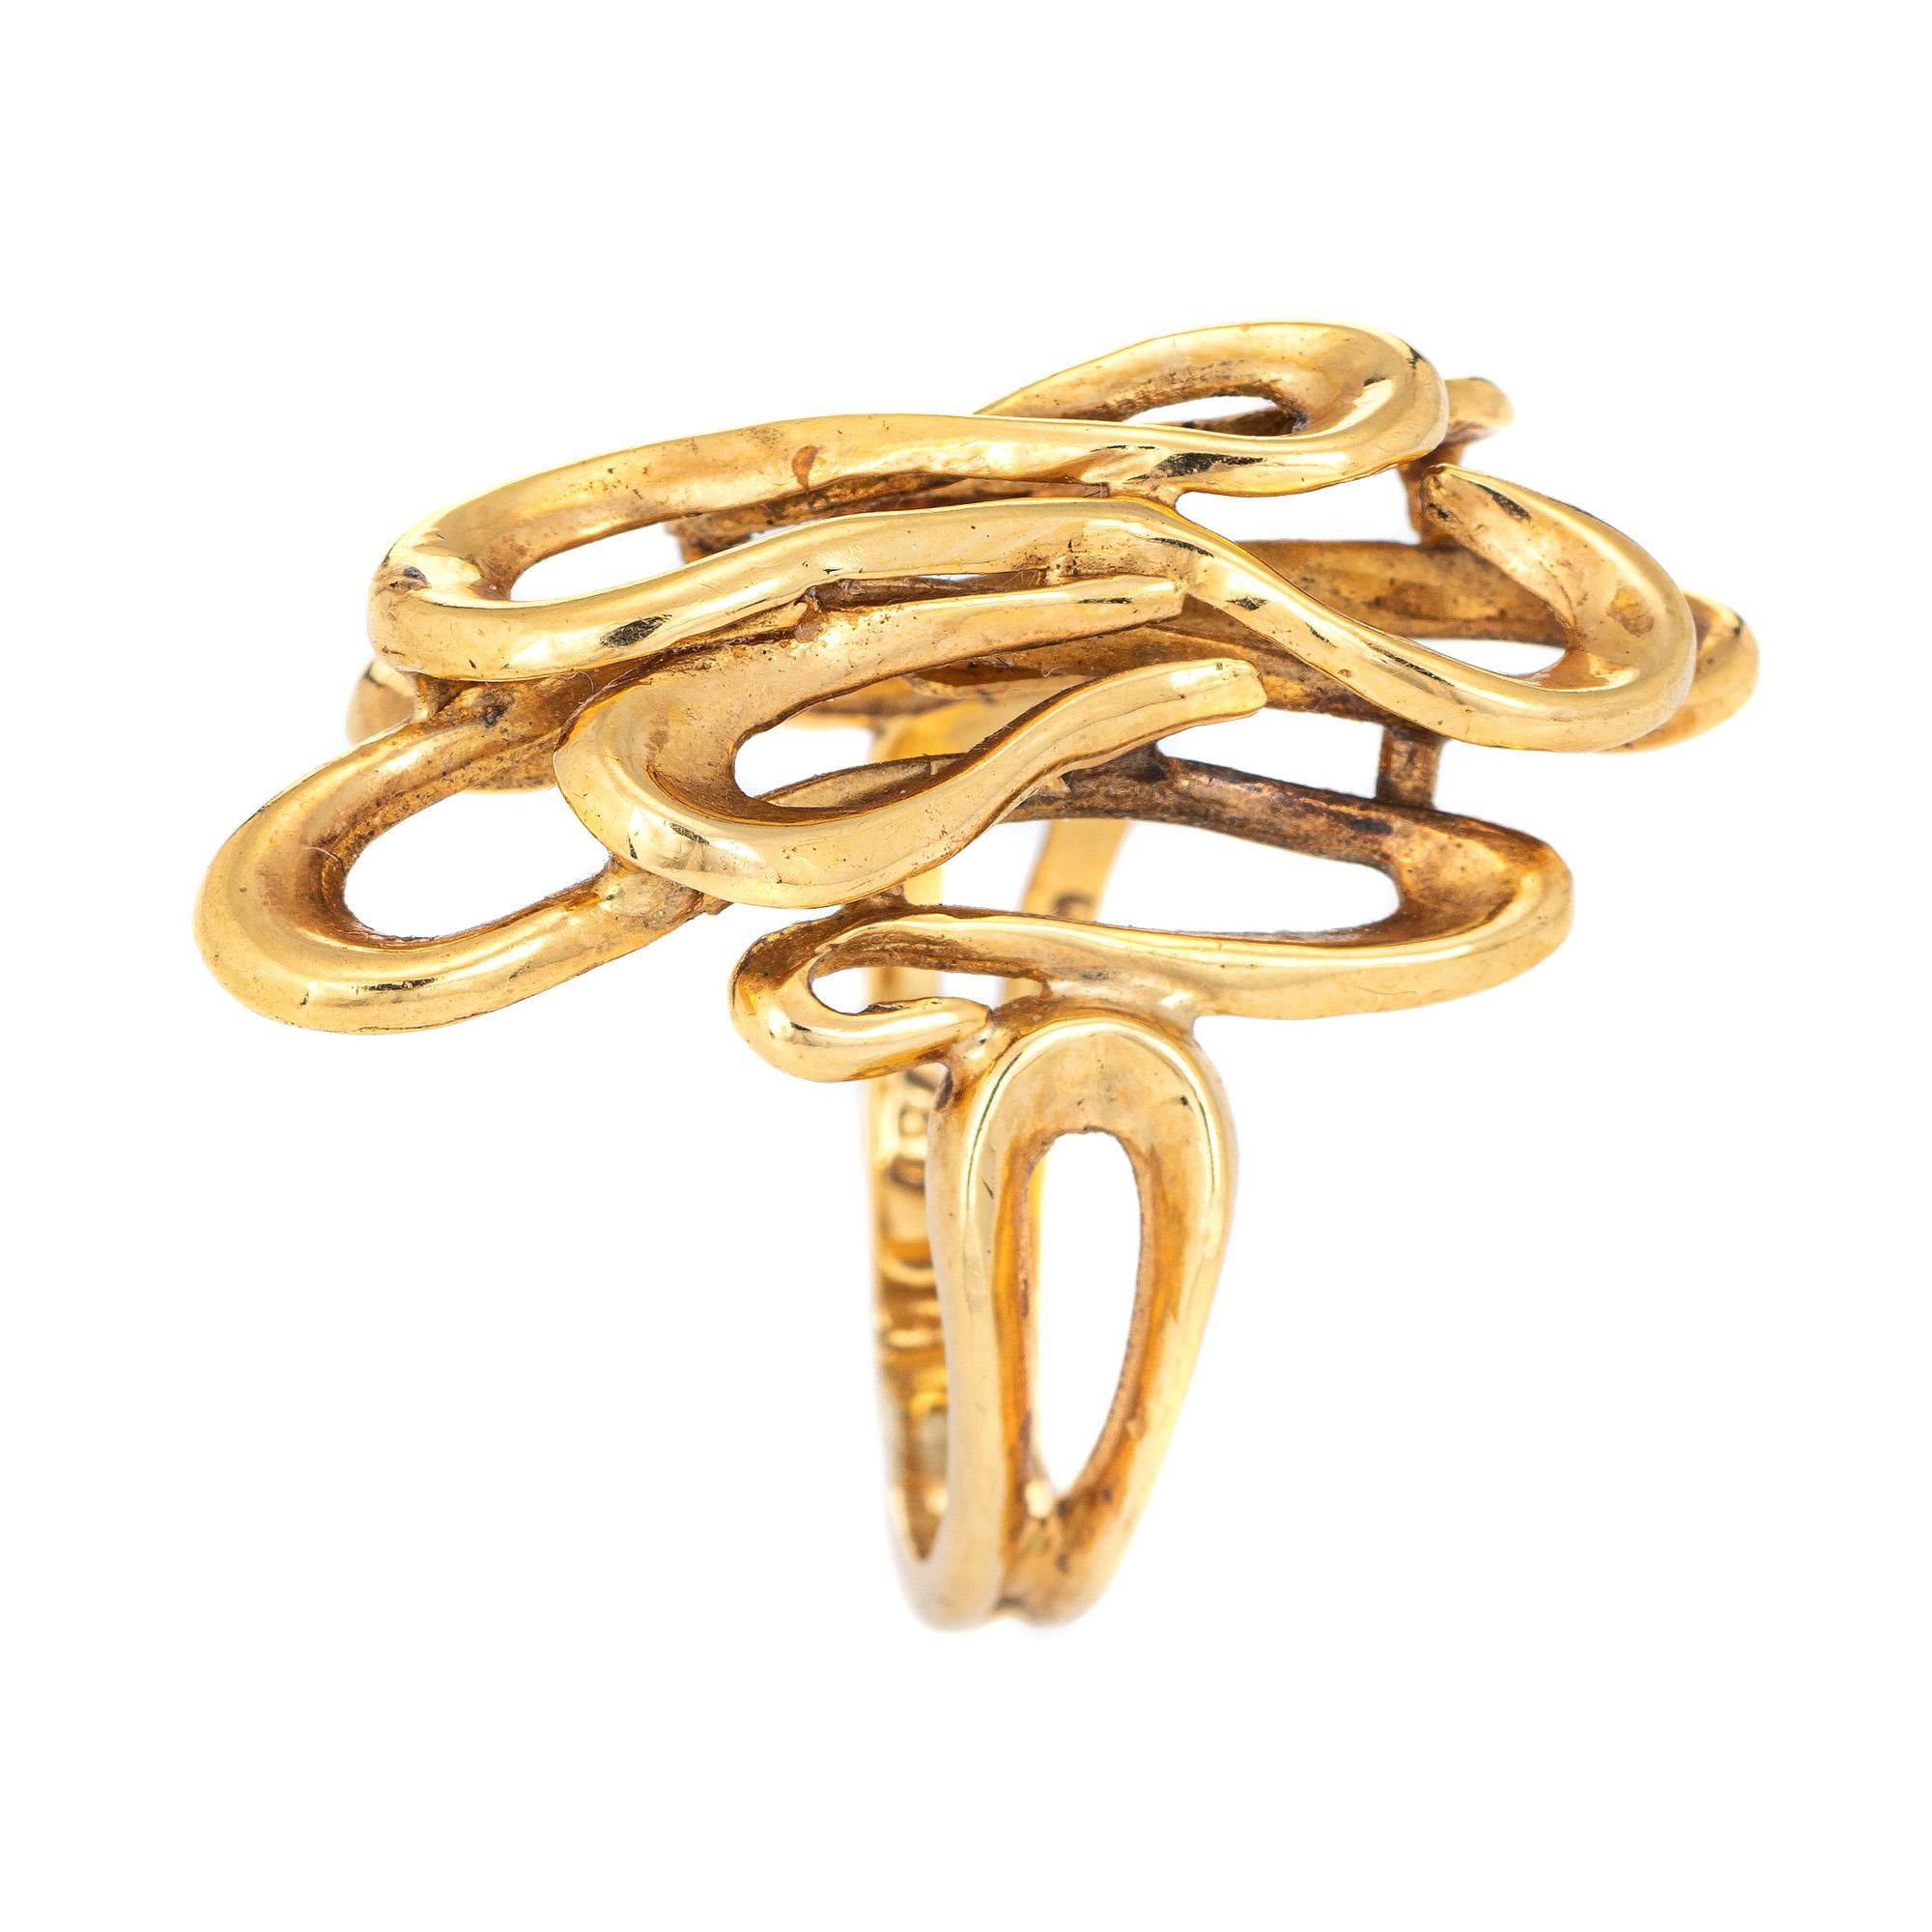 Stylish Ilias Lalaounis large cocktail ring crafted in 18 karat yellow gold. 

The dramatic and bold ring highlights ripples of gold in a graduated fashion. Greek jeweler Ilias Lalaounis was a pioneer and globally renowned goldsmith. The techniques